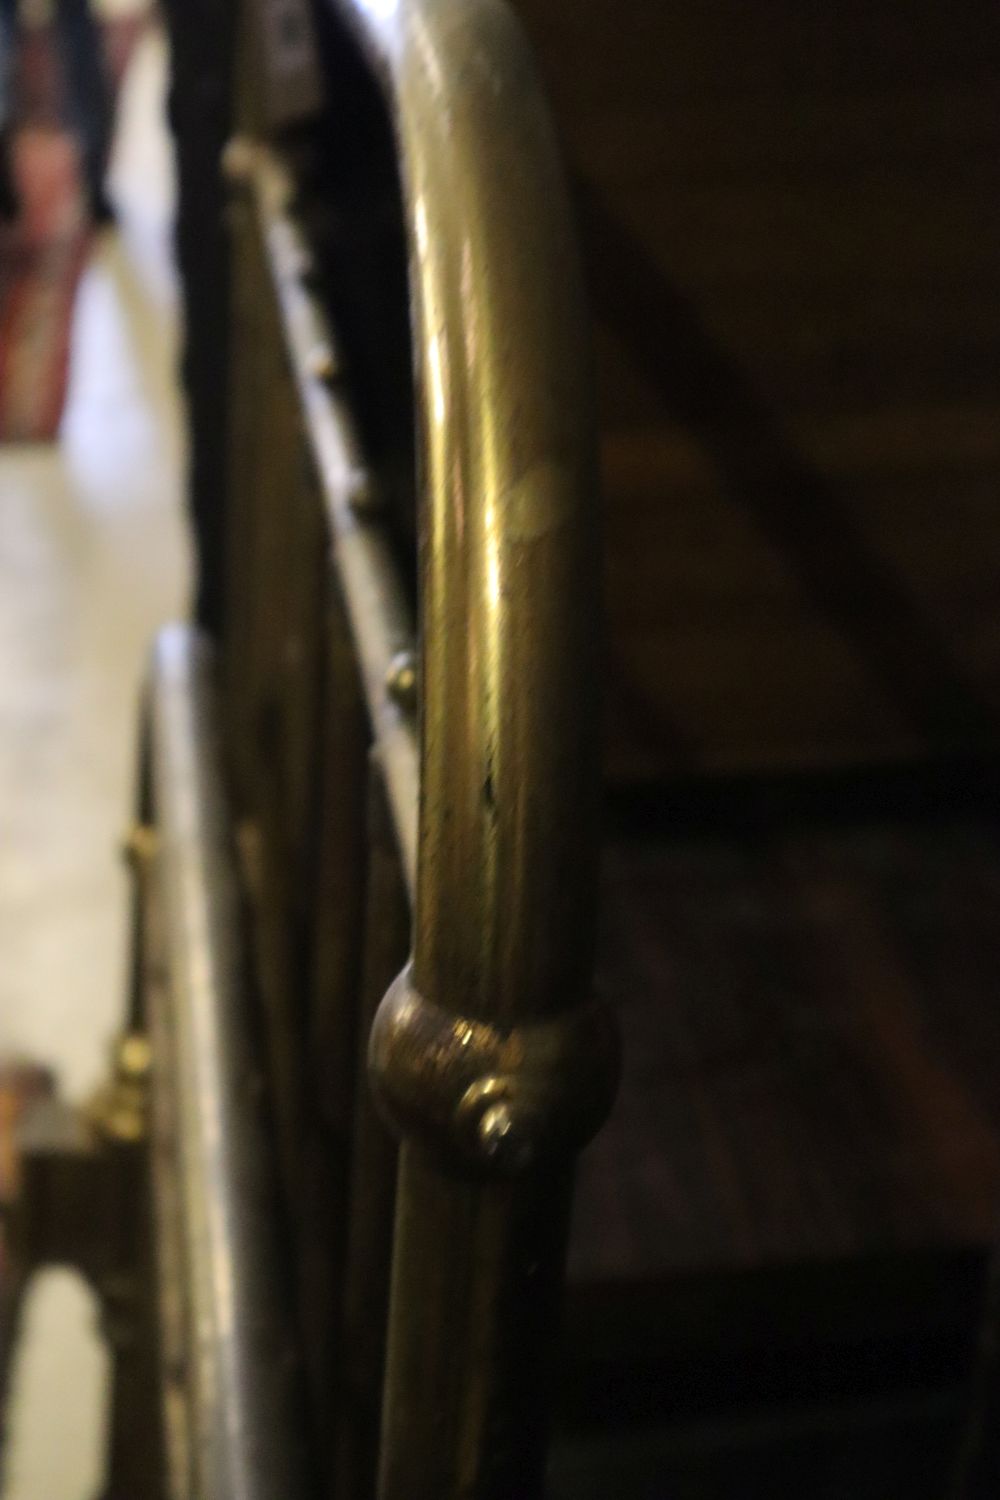 A late Victorian brass single bed frame, width 92cm